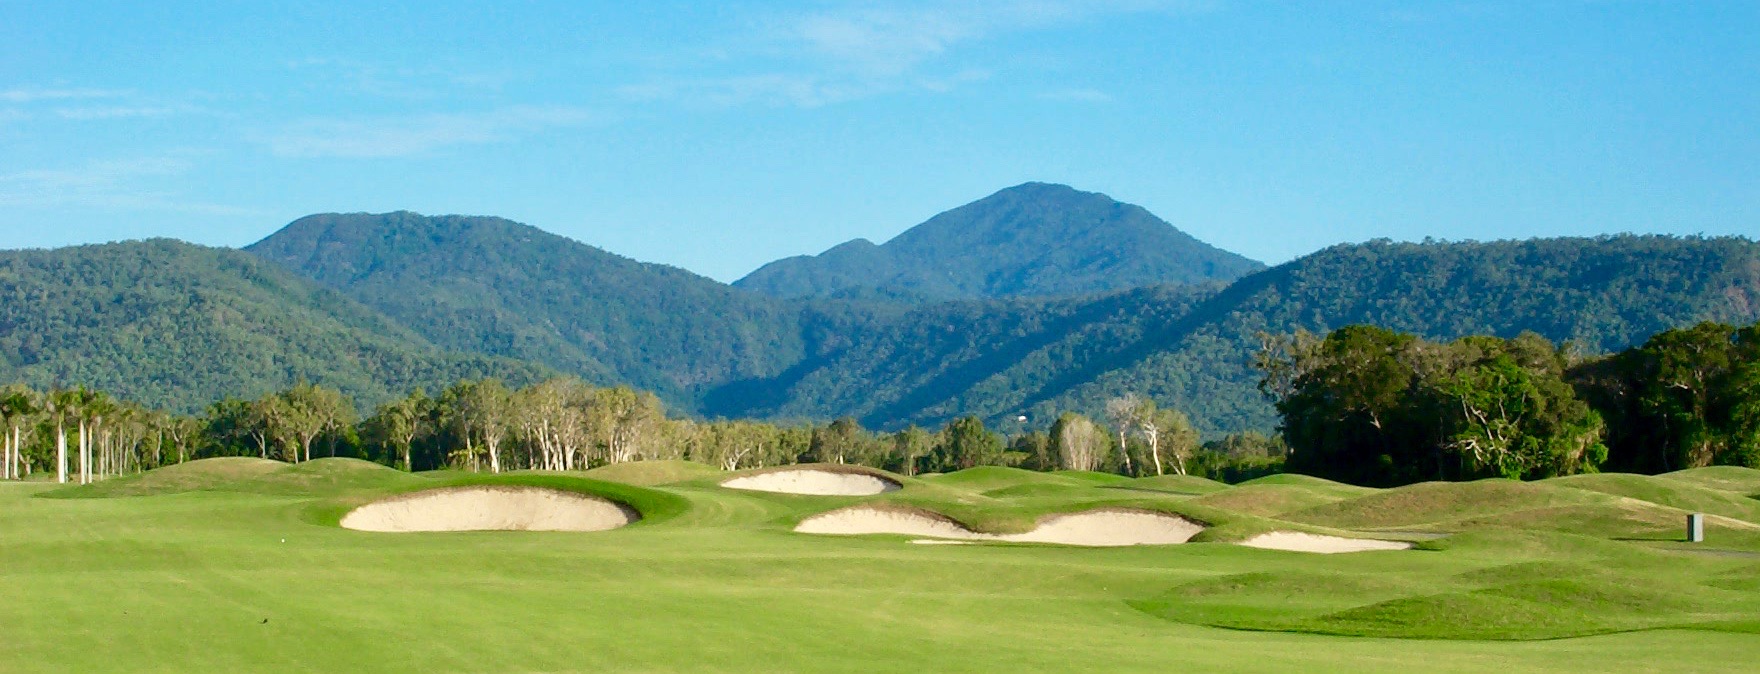 The Links at Port Douglas-  Fairway Bunkers on 4